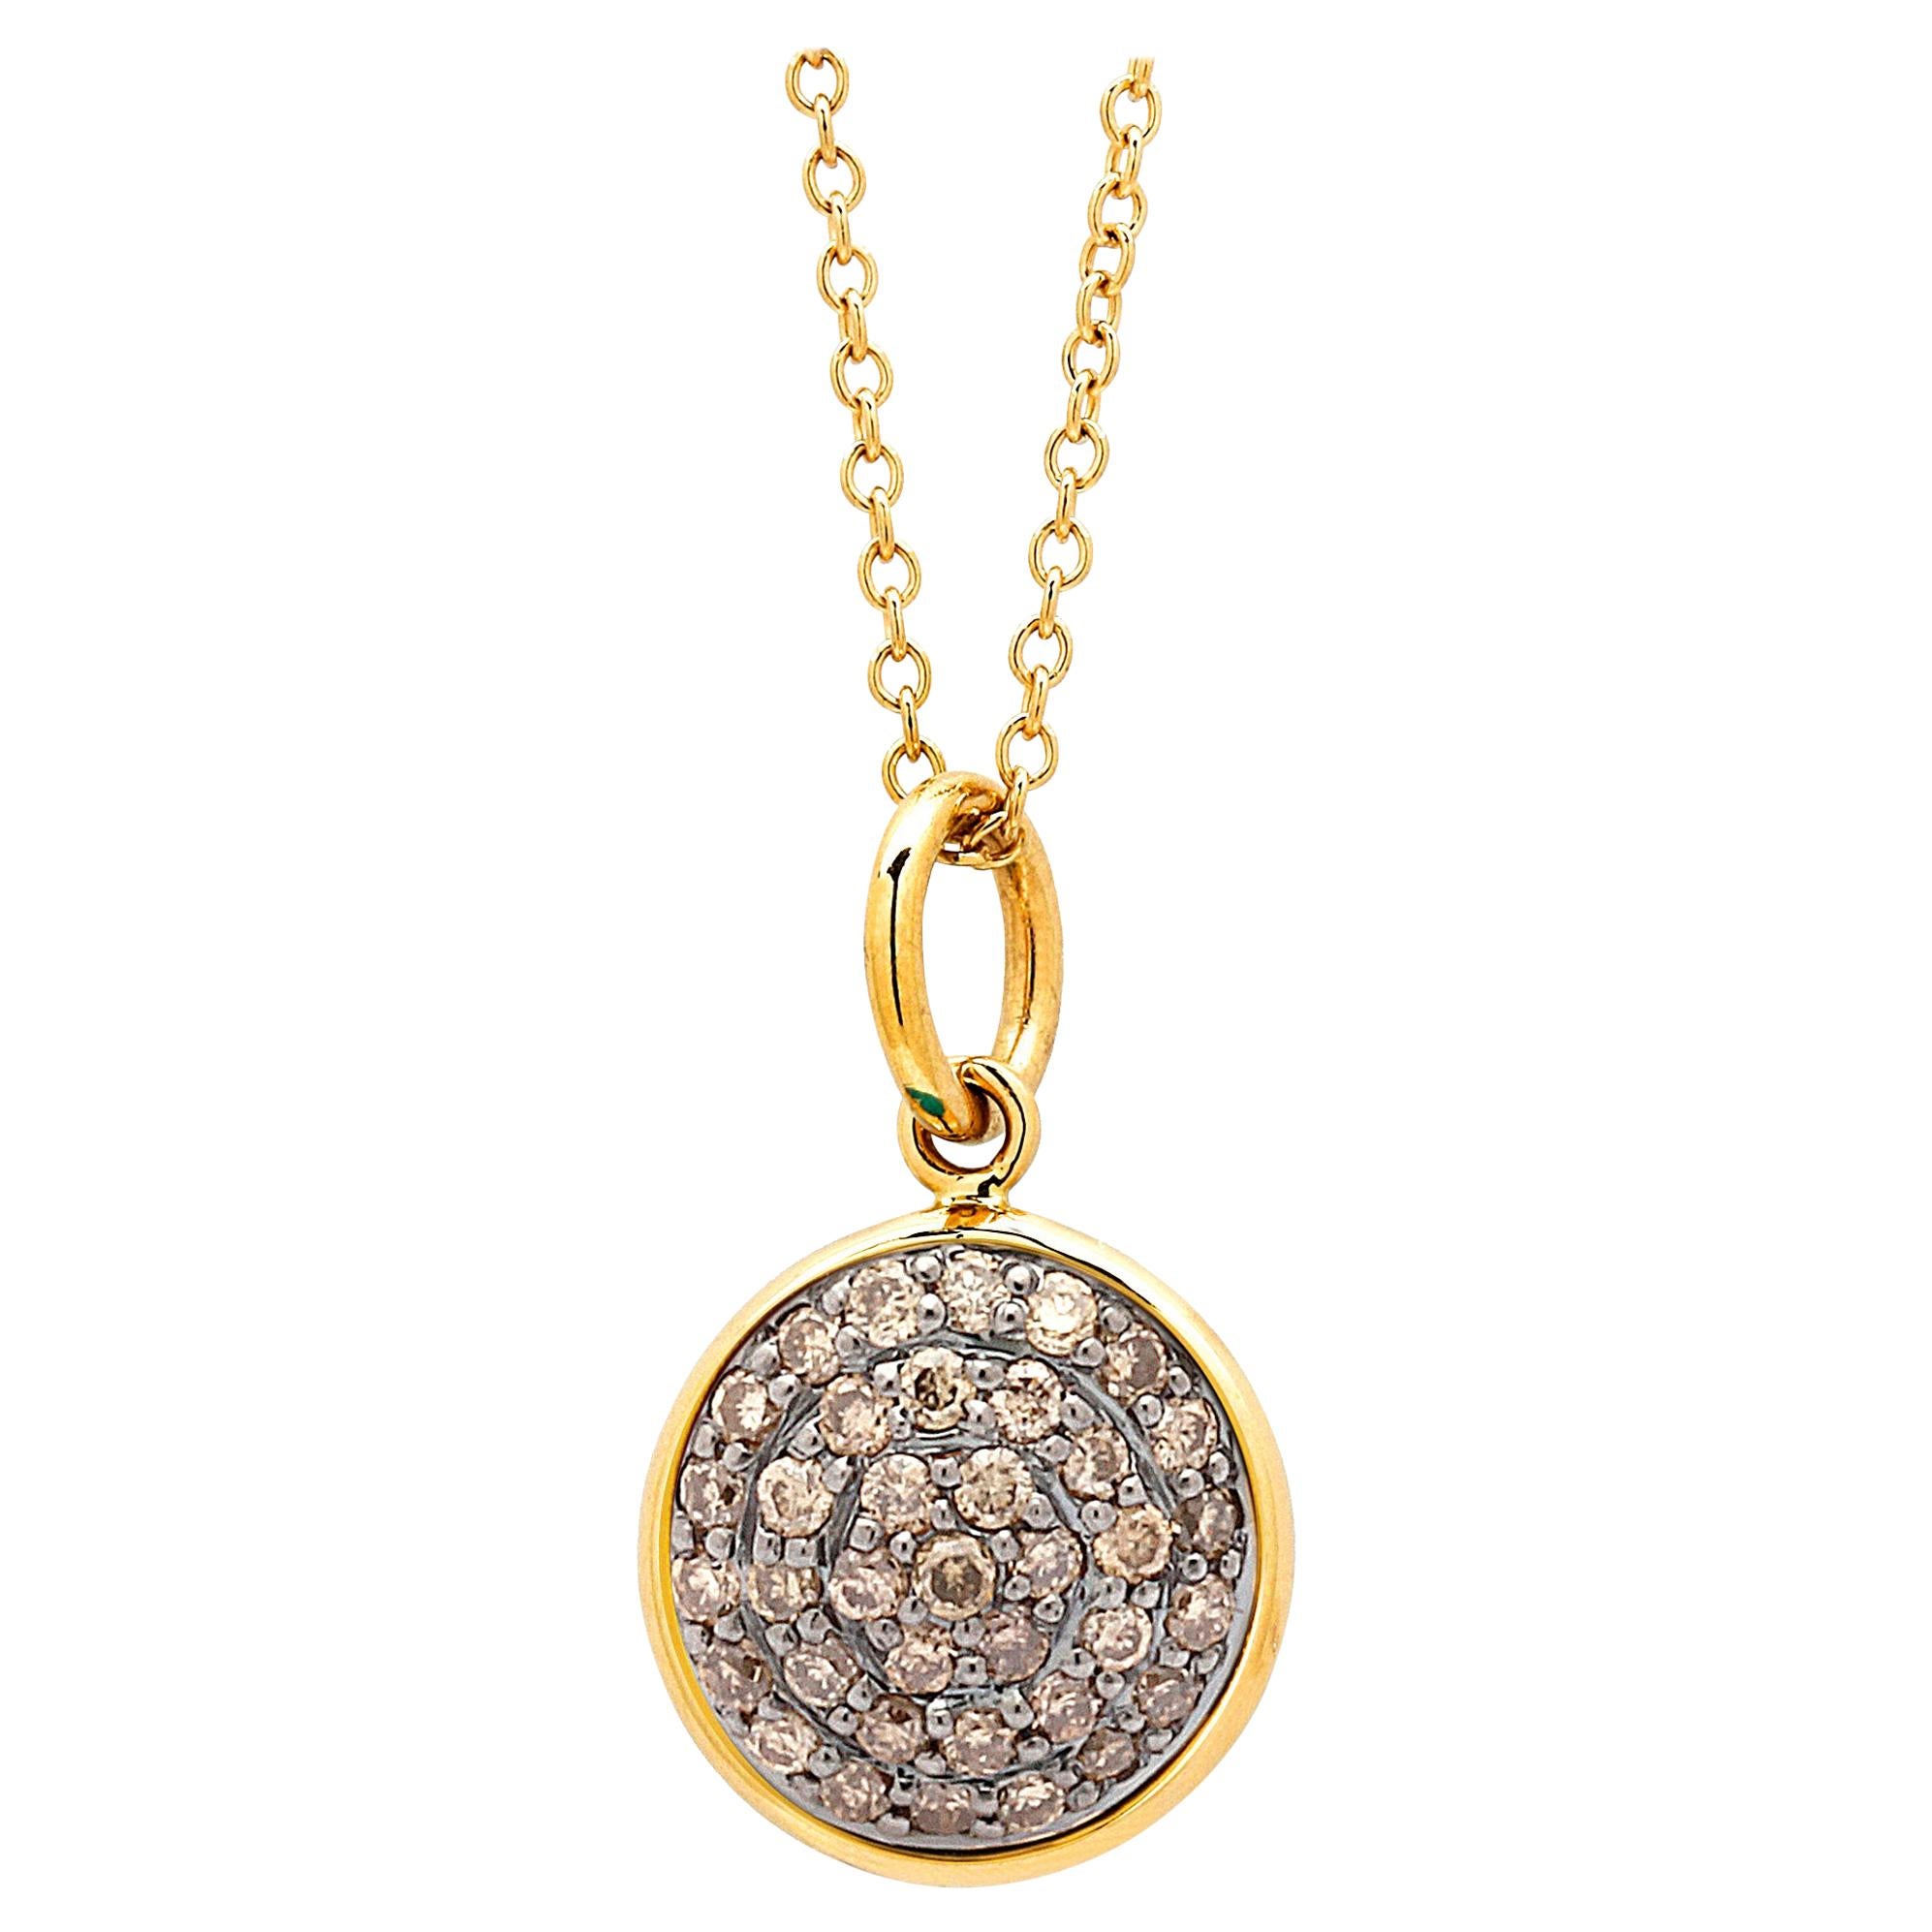 Syna Yellow Gold Charm Pendant with Brown Diamonds